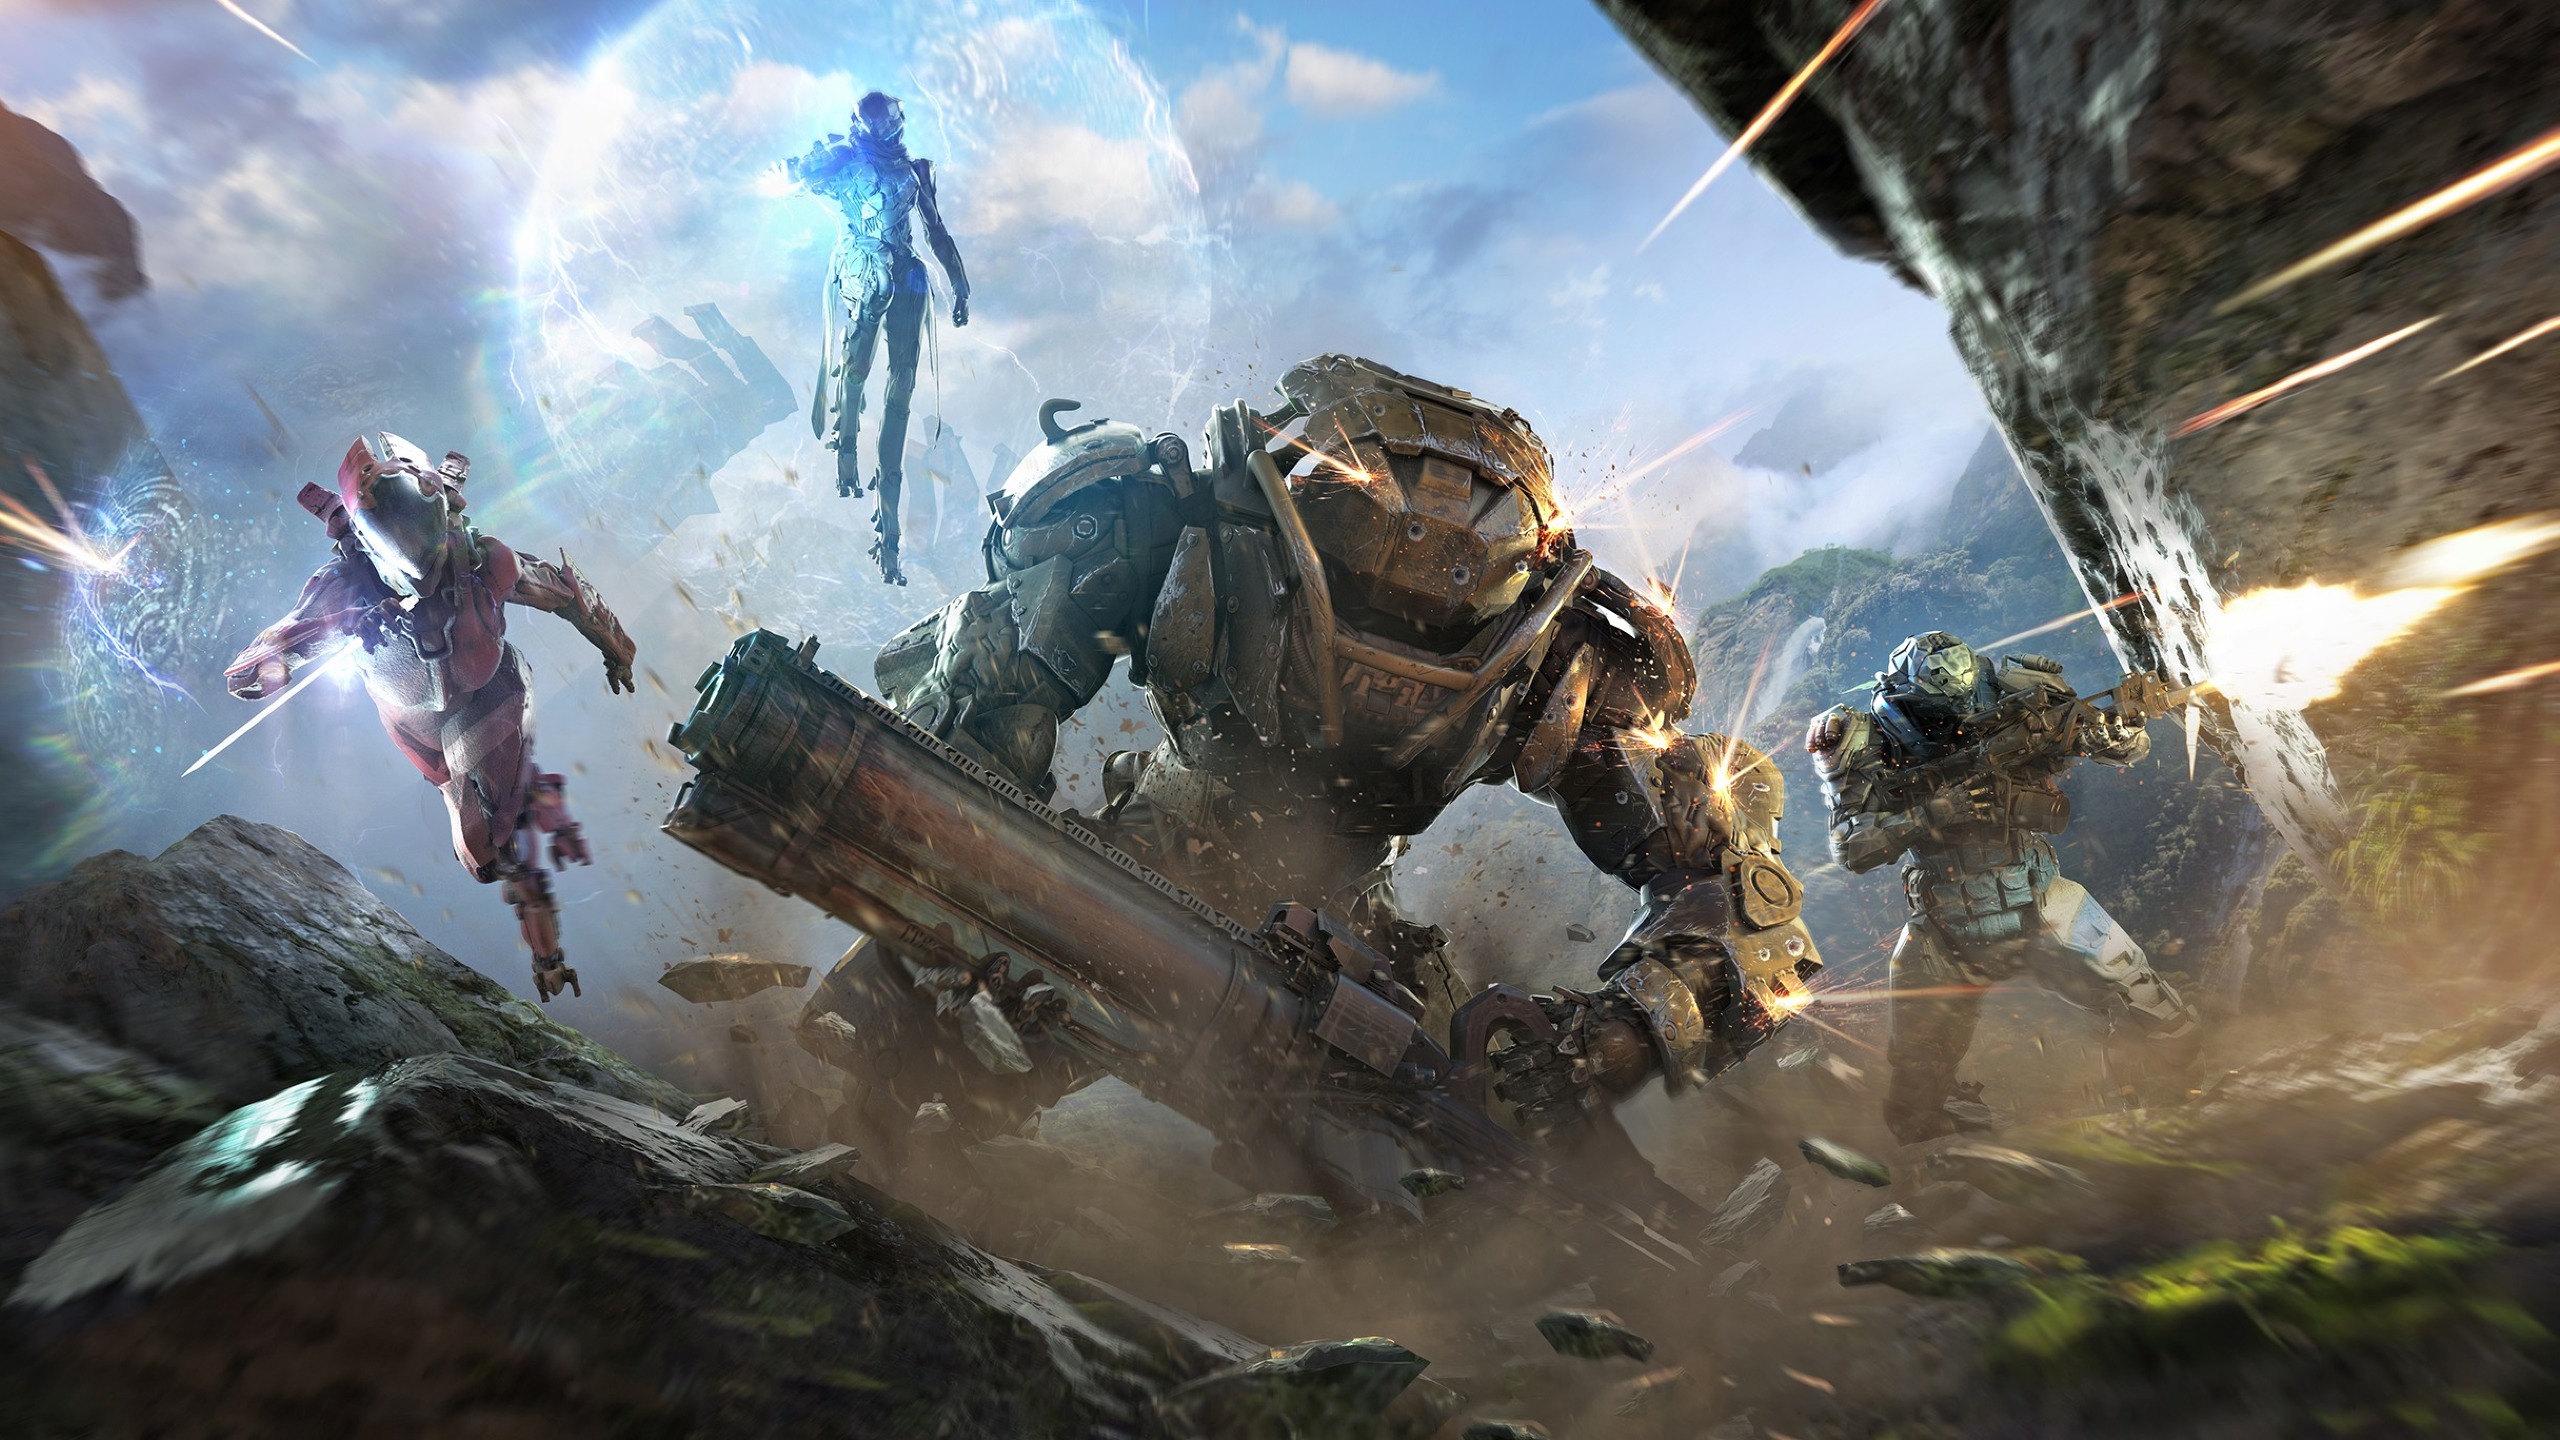 Download 1125x2436 Anthem, Robot, Suit, Sci-fi Games, Artwork Wallpapers  for iPhone 11 Pro & X